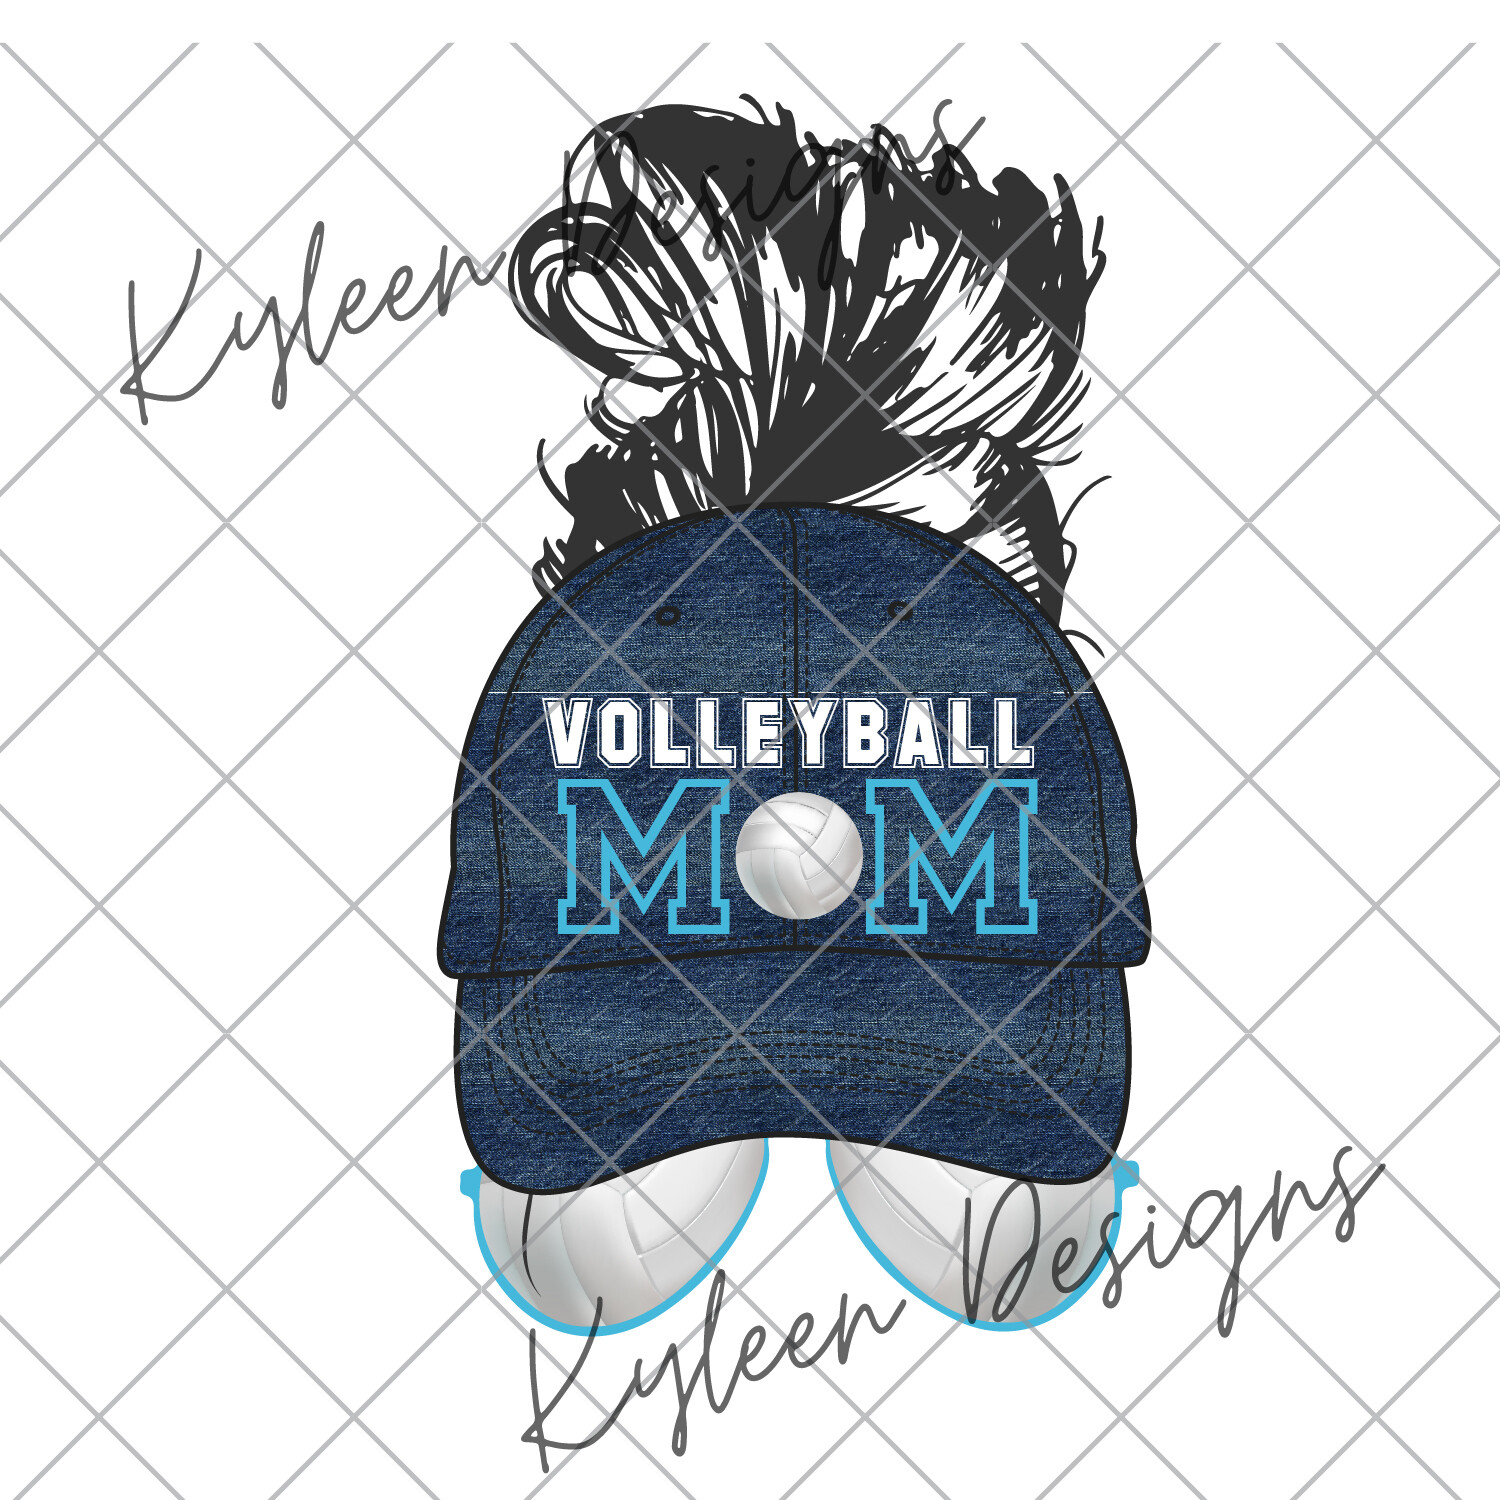 Mom bun with hat- volleyball mom 300 dpi PNG high res digital file.